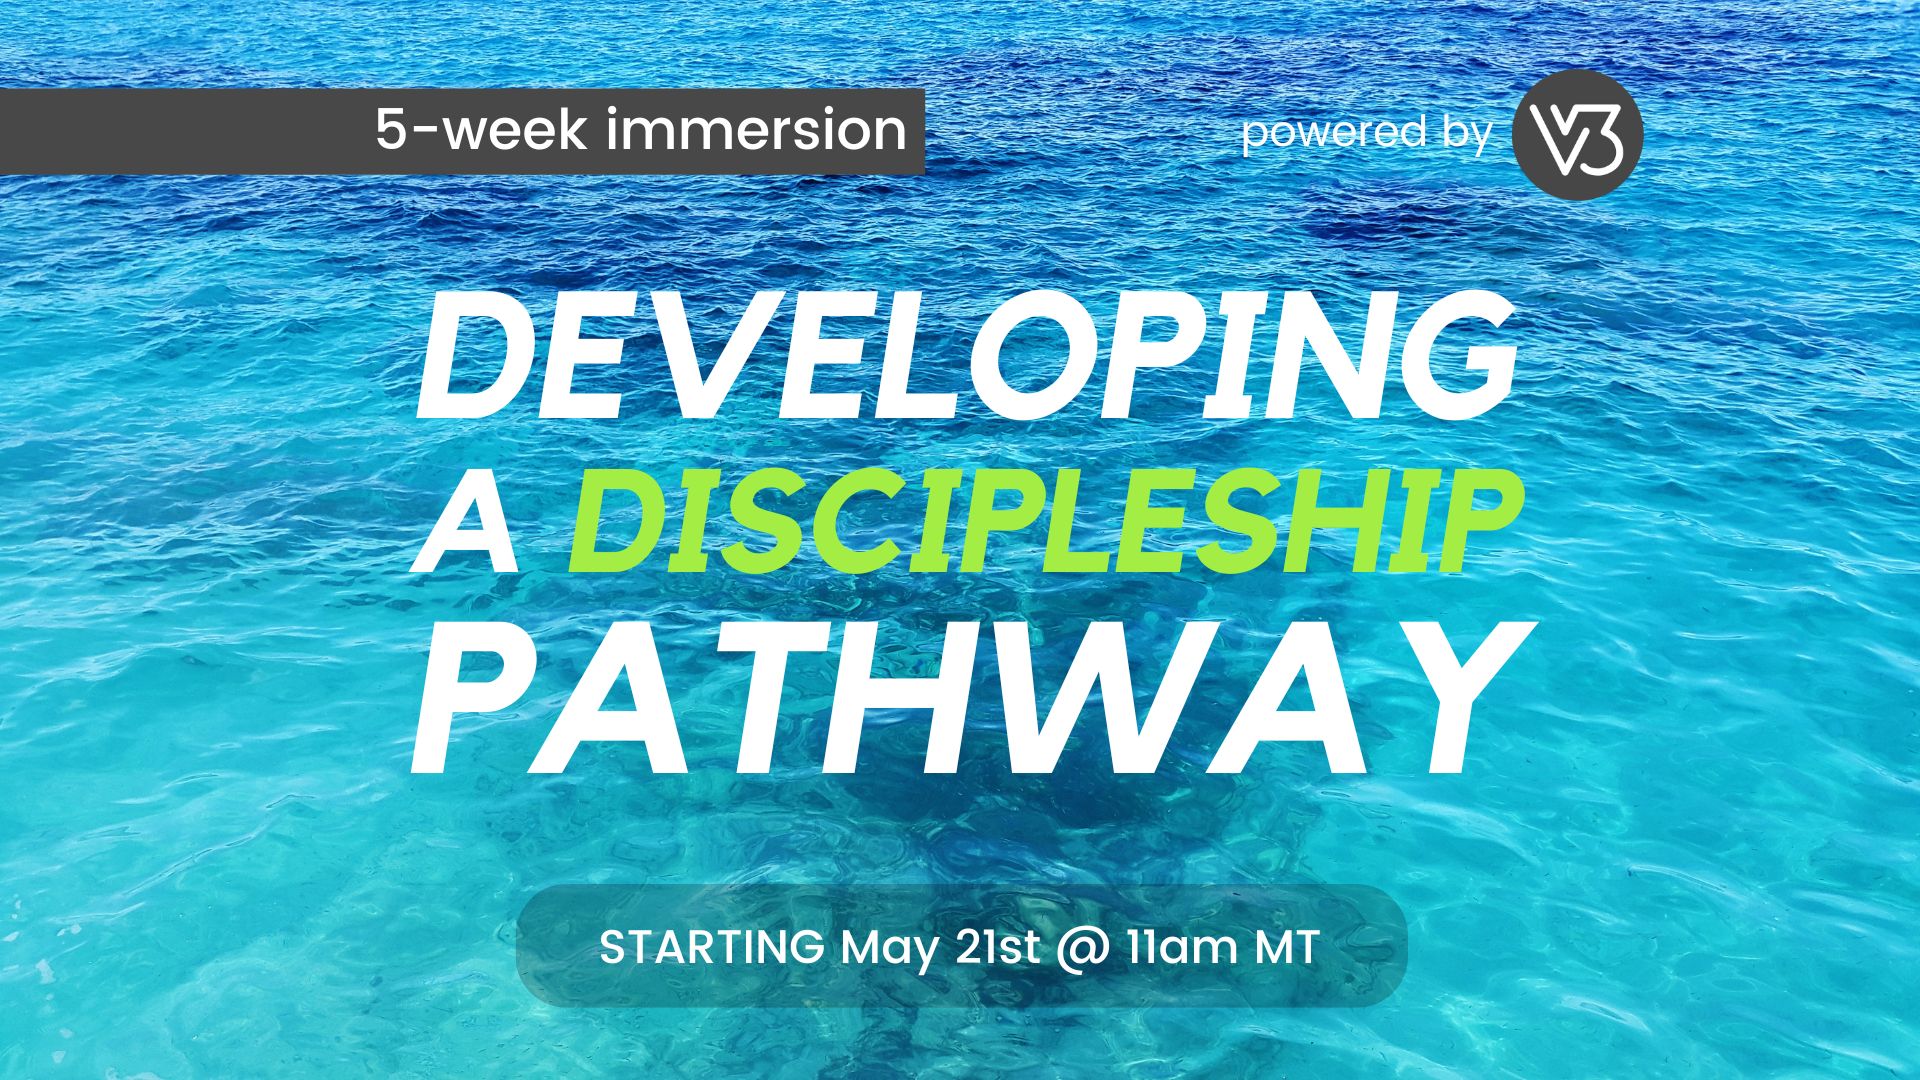 Developing a Discipleship Pathway